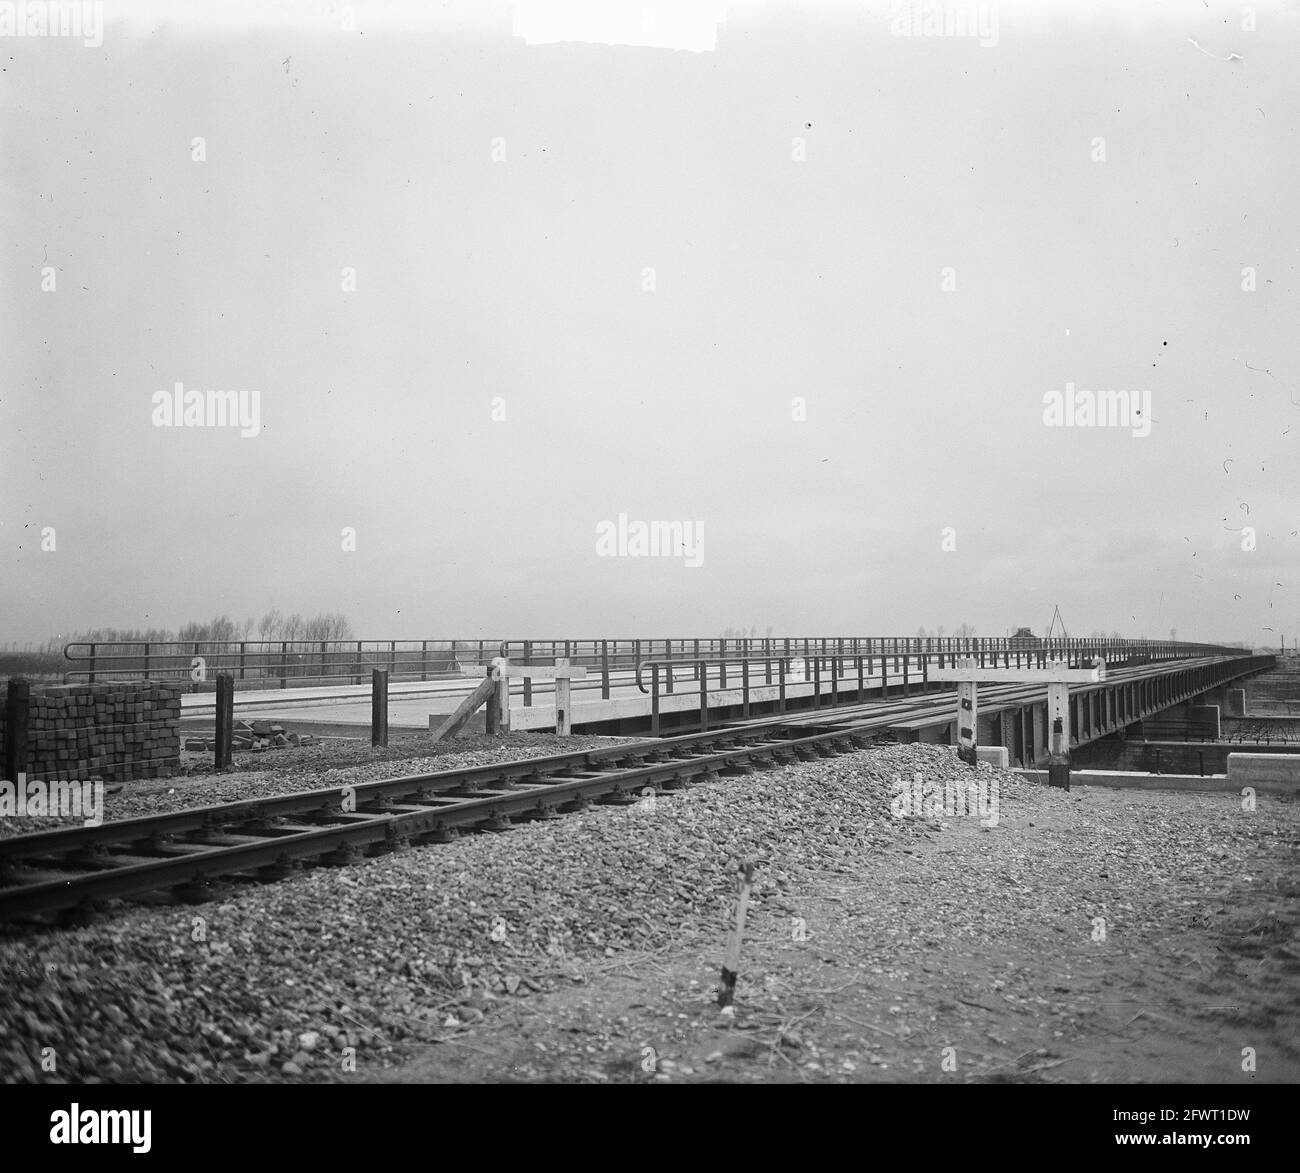 New road bridge over lock at Tiel, January 6, 1950, road bridges, The Netherlands, 20th century press agency photo, news to remember, documentary, historic photography 1945-1990, visual stories, human history of the Twentieth Century, capturing moments in time Stock Photo